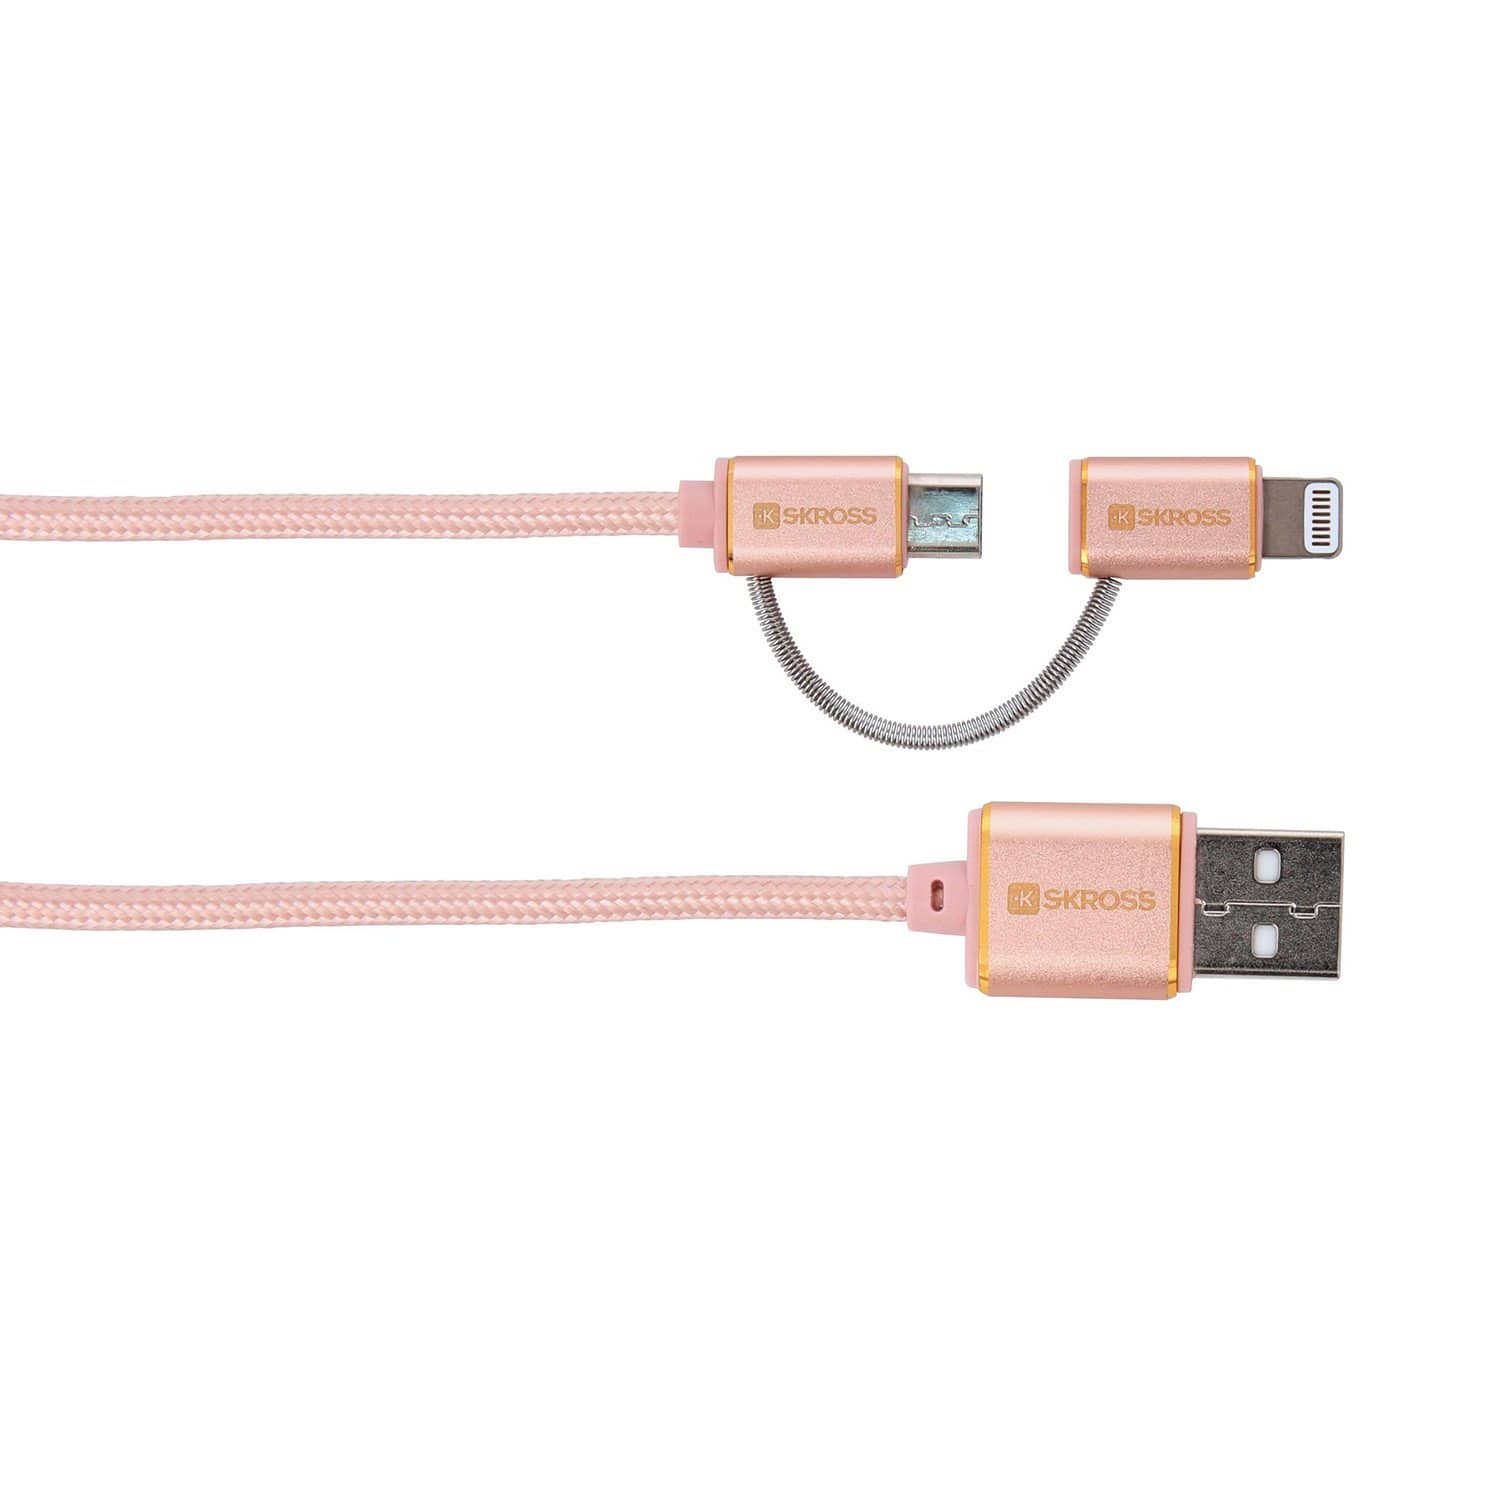 Skross Special Edition 2 in 1 Charge N Sync Micro USB Cable with Lightning Connector - Rose Gold - 2700251 - Jashanmal Home